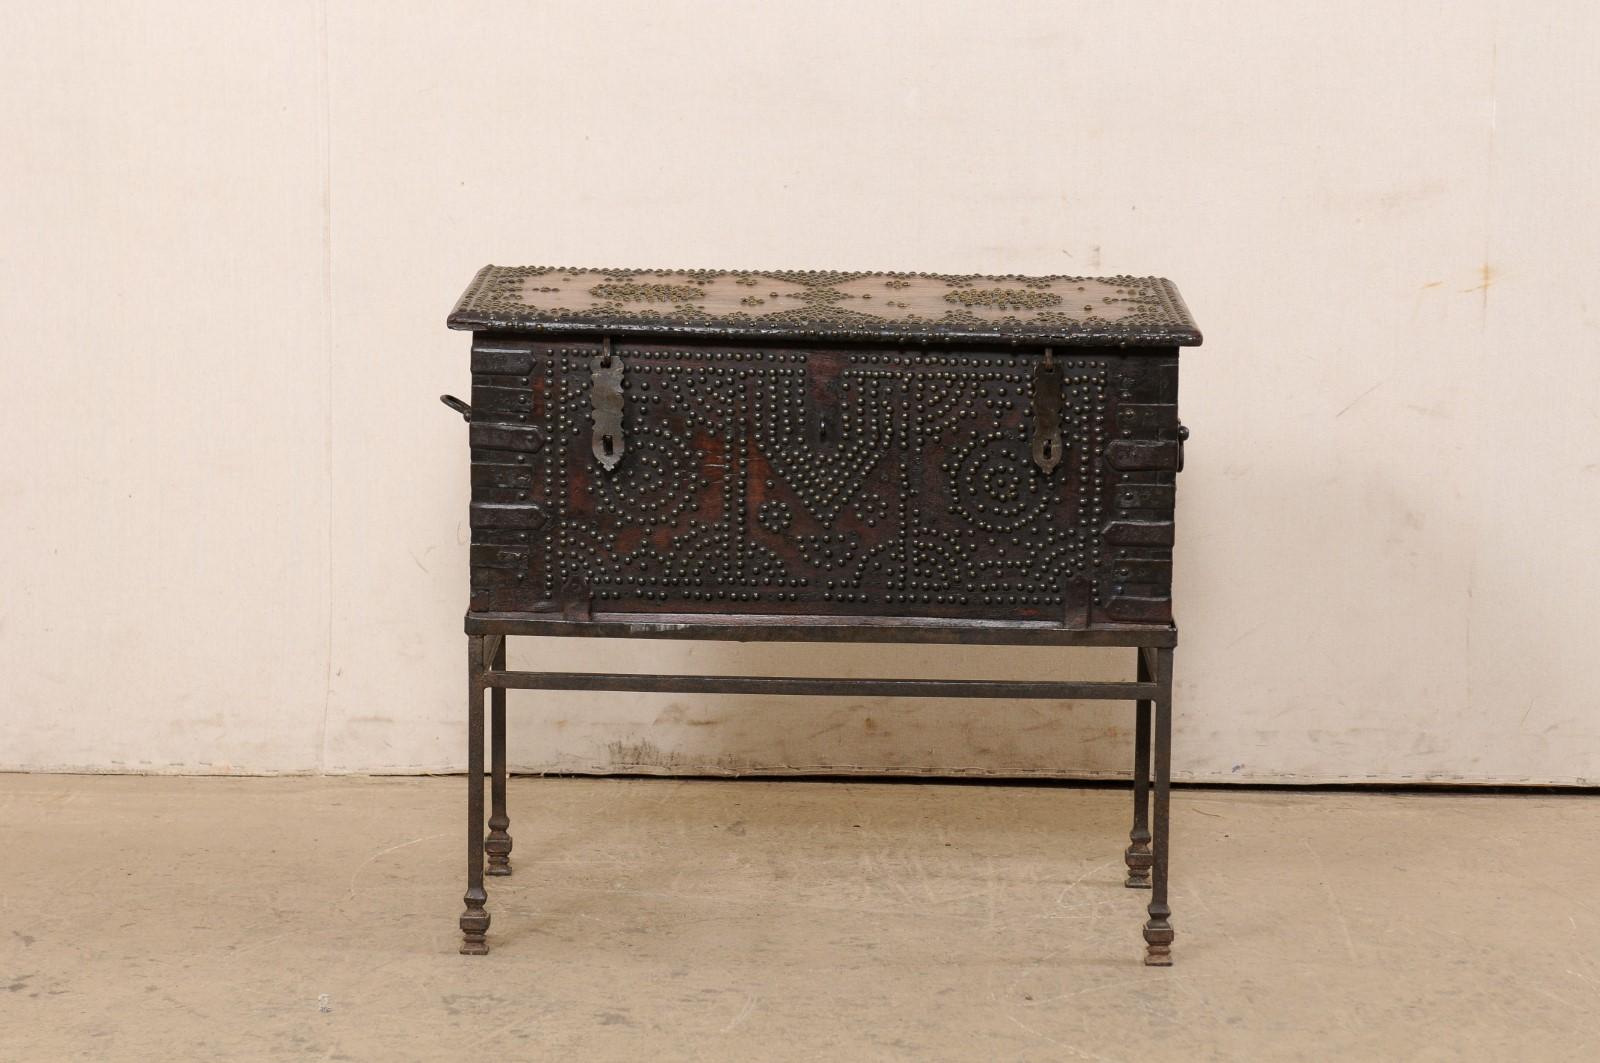 A British Colonial rosewood trunk from the turn of the 18th and 19th century. This antique English trunk, which would also function beautifully as a small table, has been nicely adorn with a patterning of studs (including circular medallions, cross